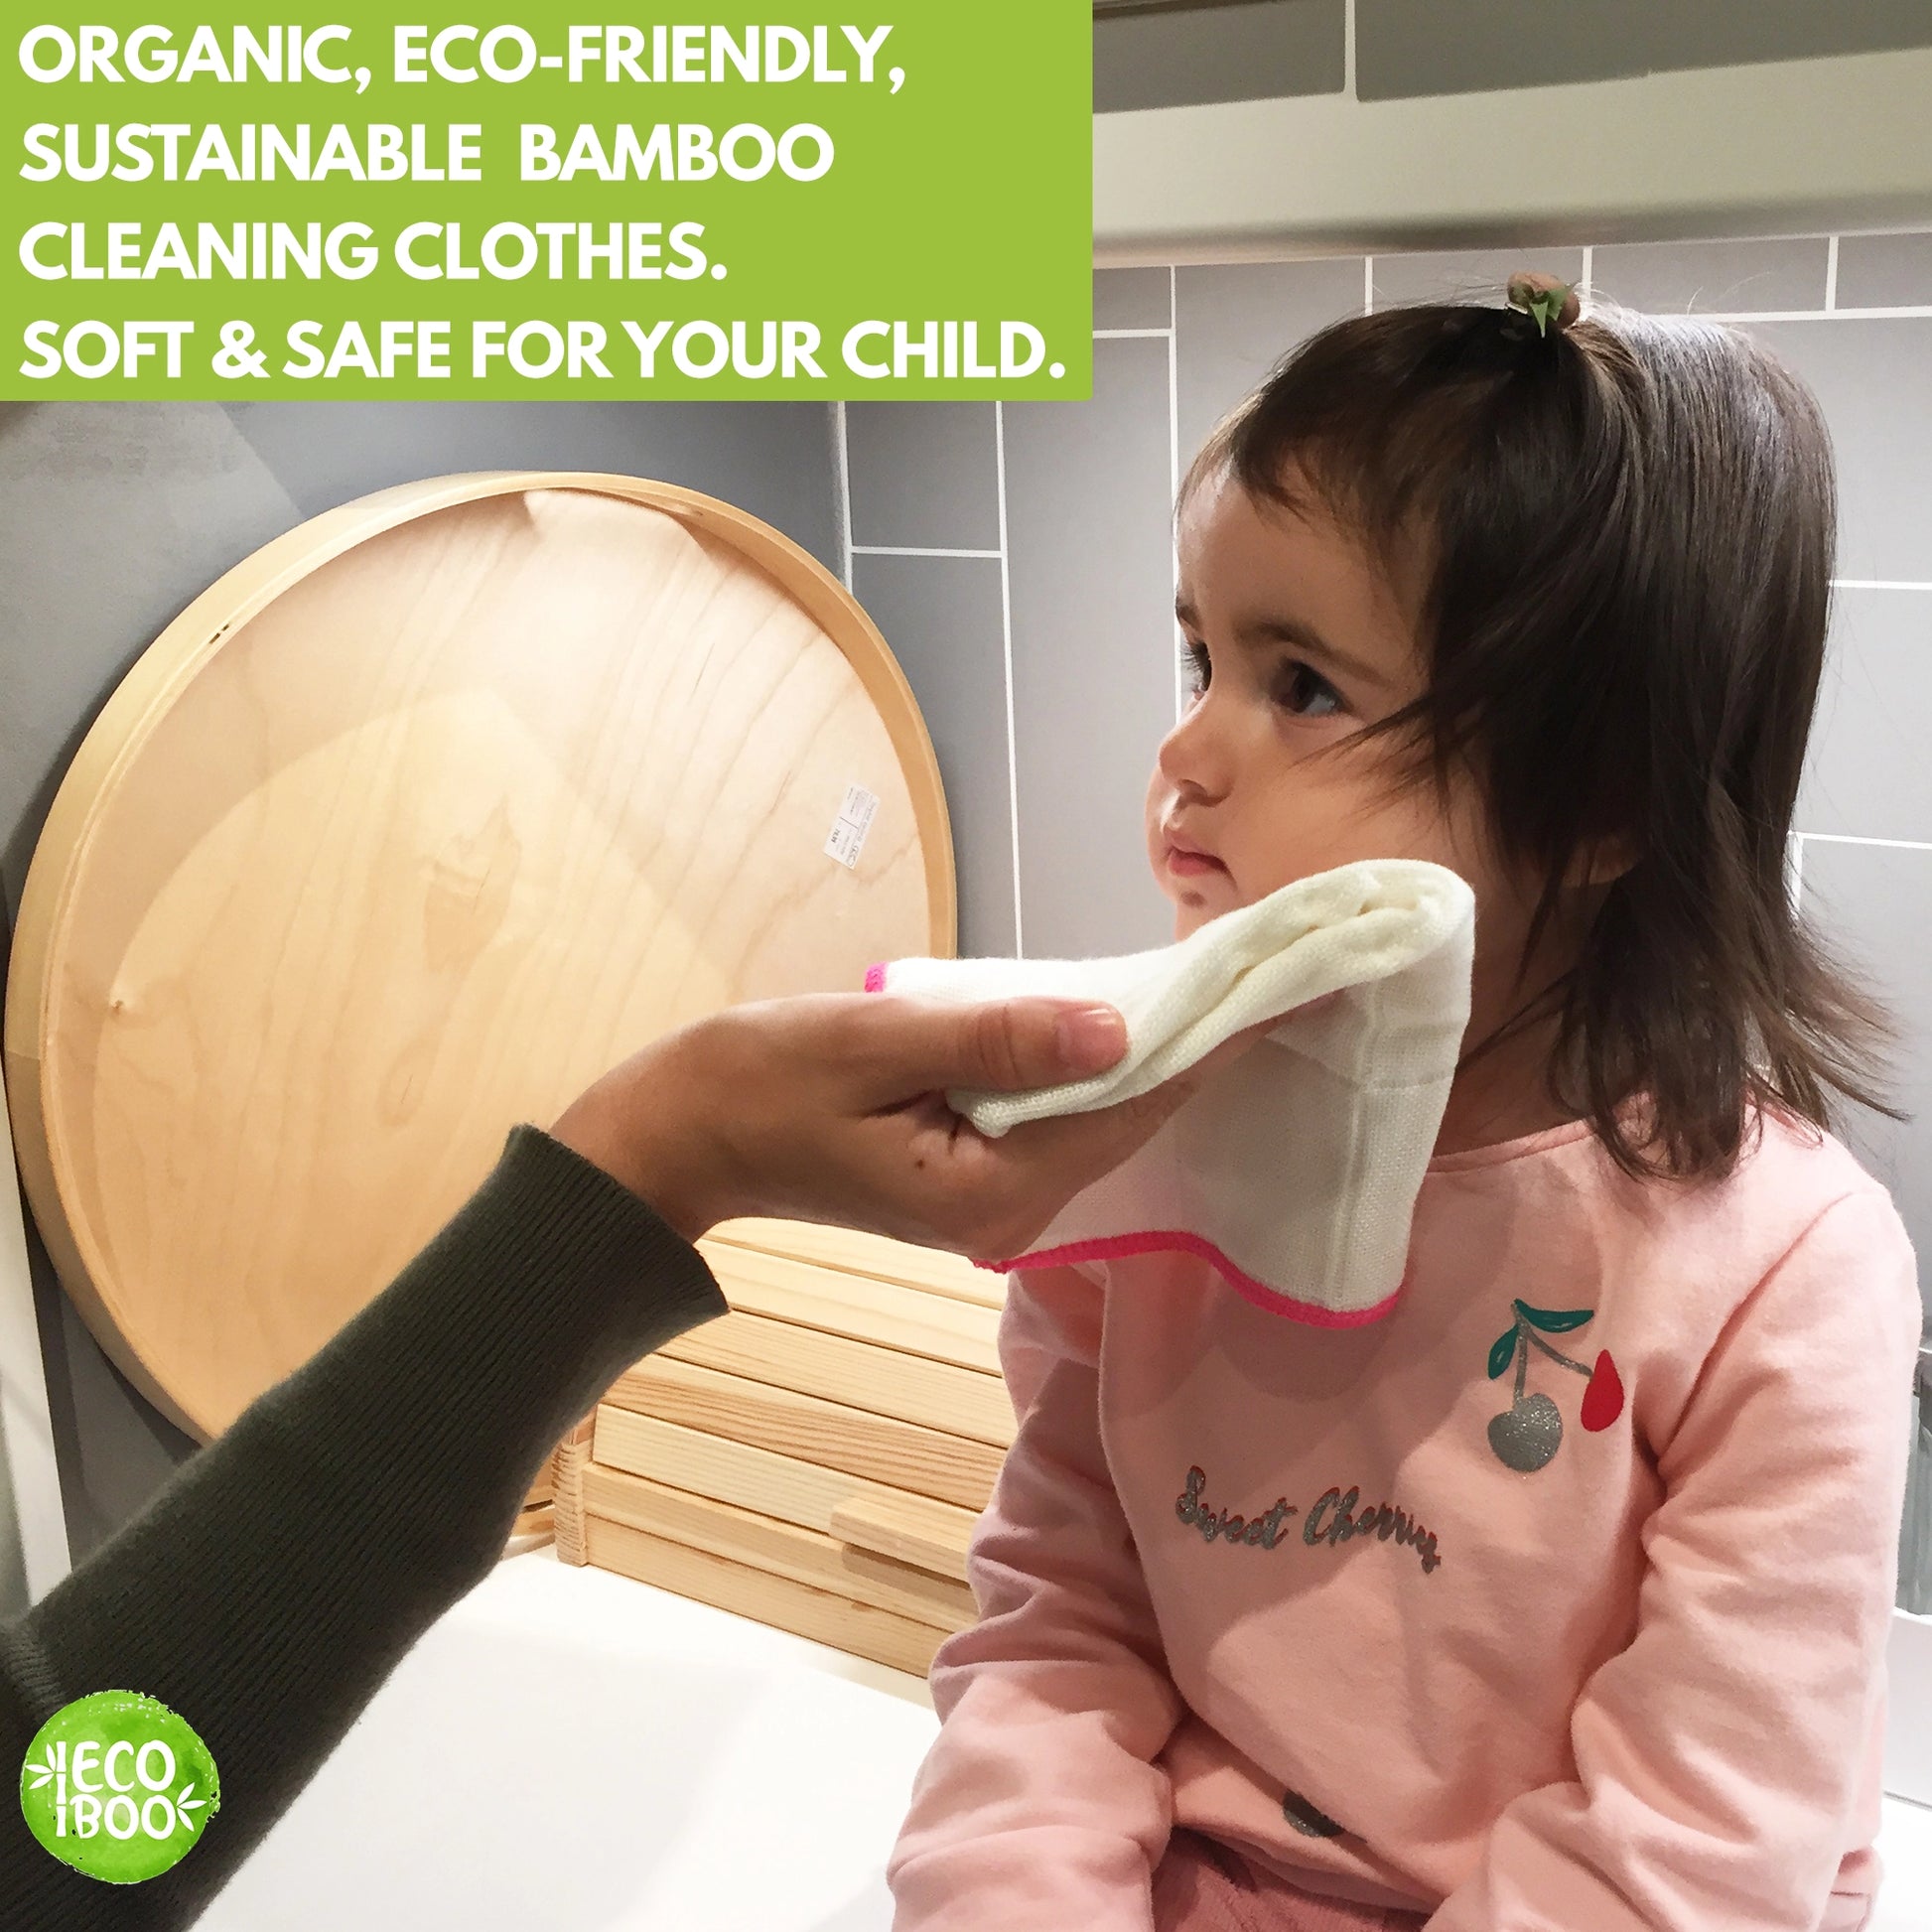 Unpaper towels - safe for your kids. Messy toddlers are no match for Ecoboo! Use on sticky hands, faces, trays and floors.